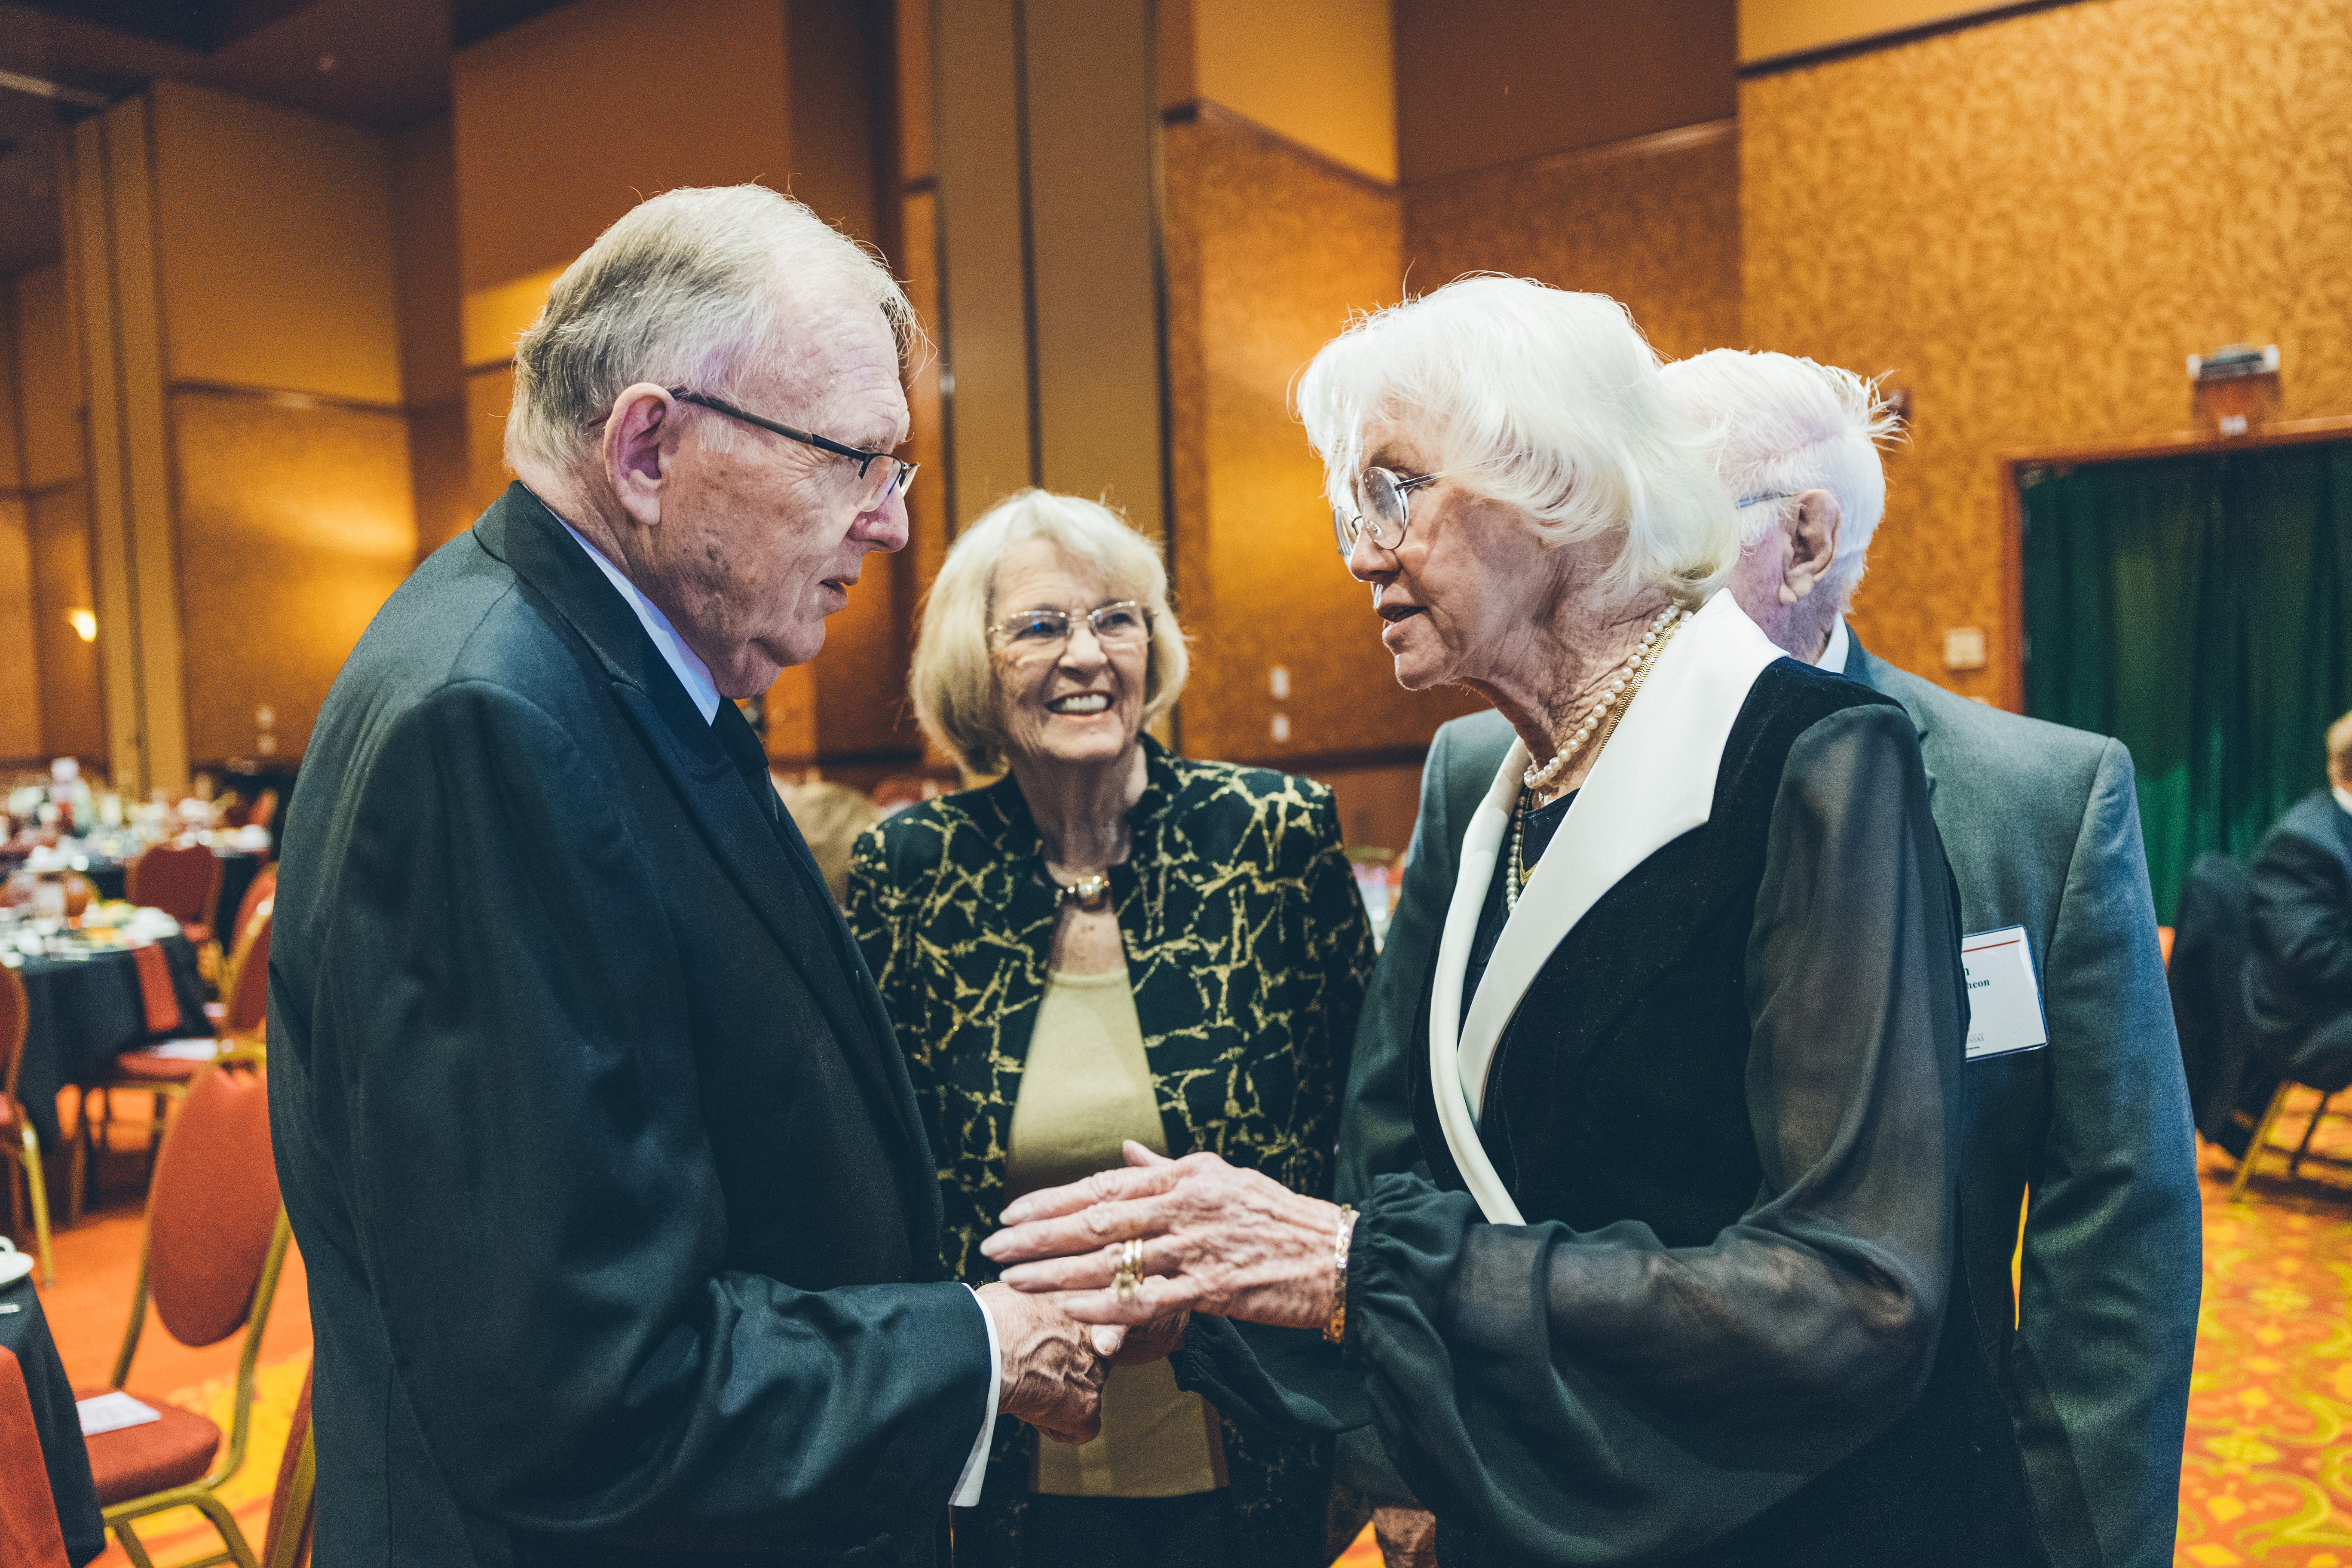 Chancellor Emeritus John A. White and his wife, Mary Lib, greet Hall of Fame inductee L. Lee Johns Lane.